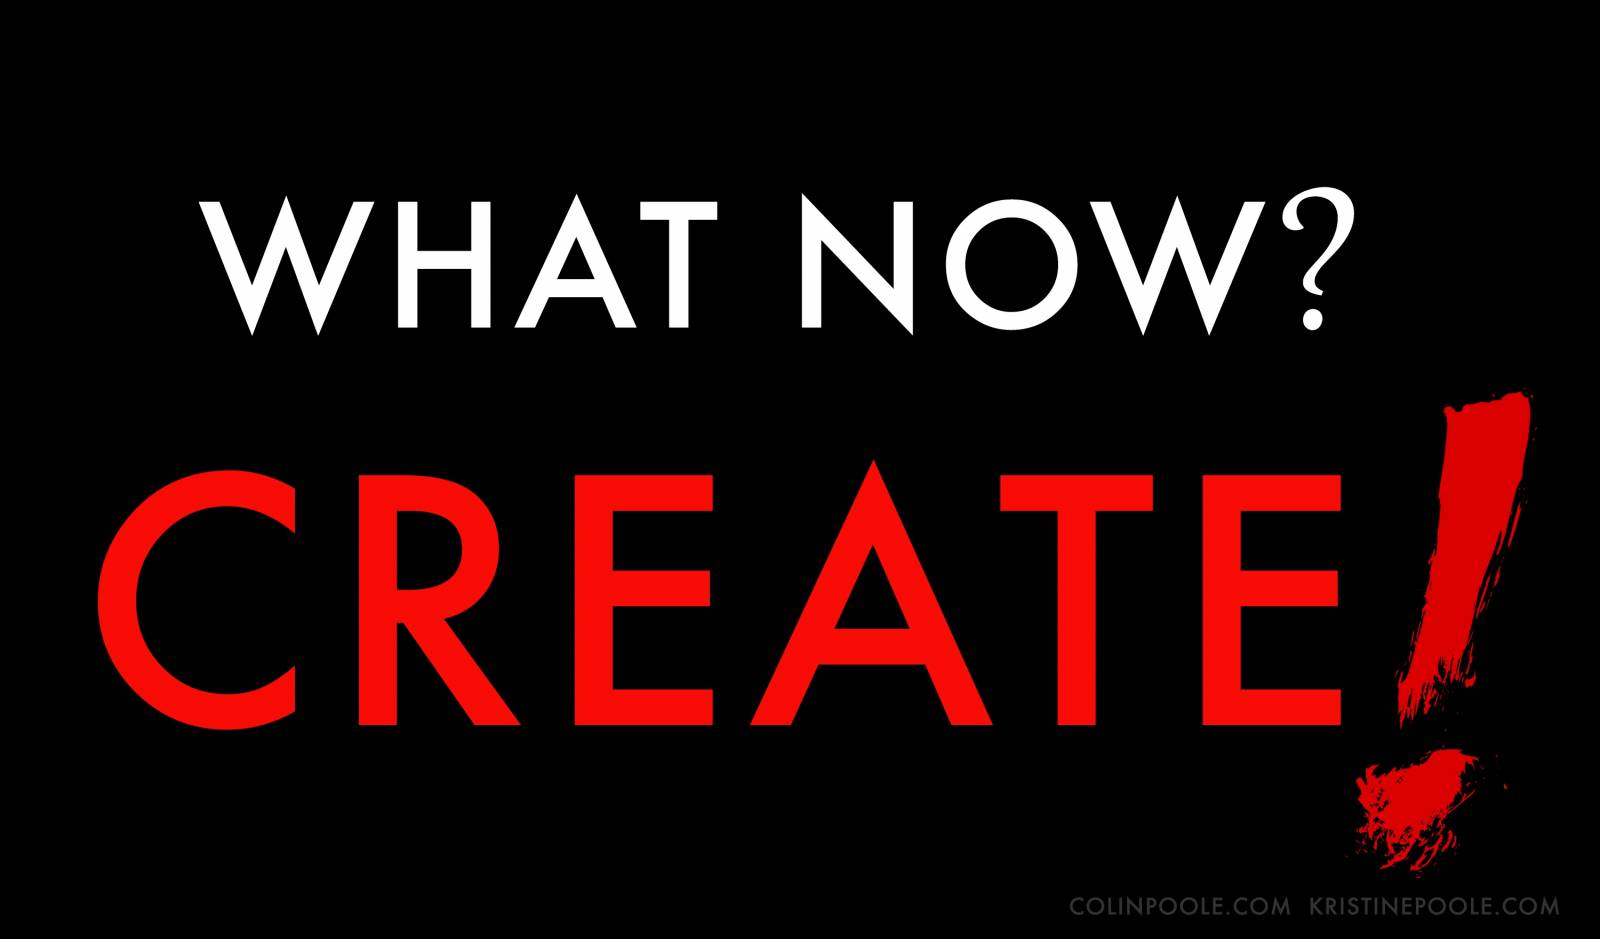 What Now? Create!